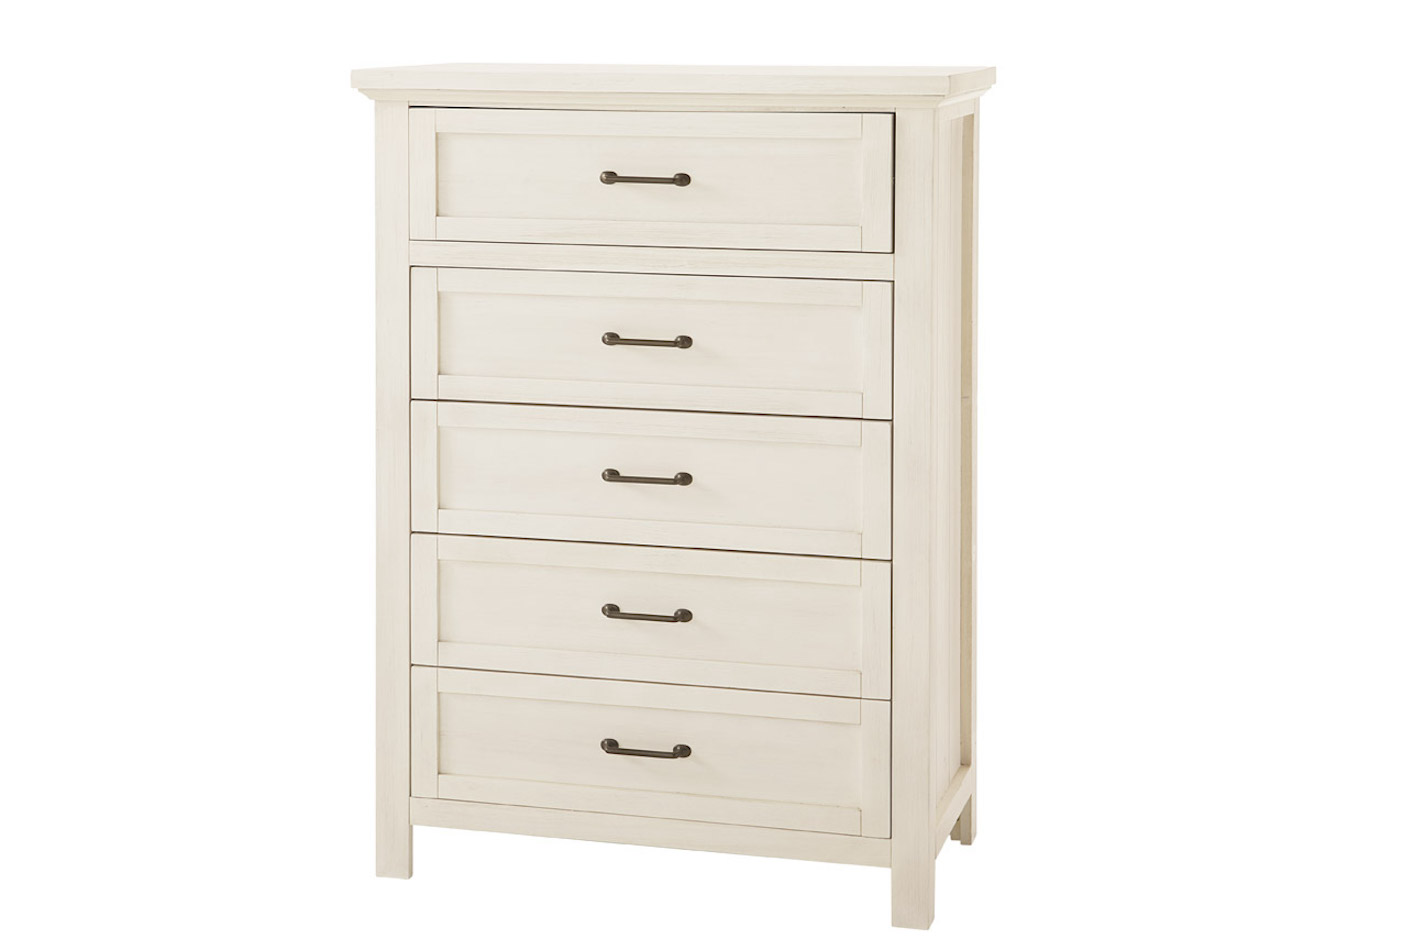 Westwood Design Westfield 5 Drawer Chest - Brushed White